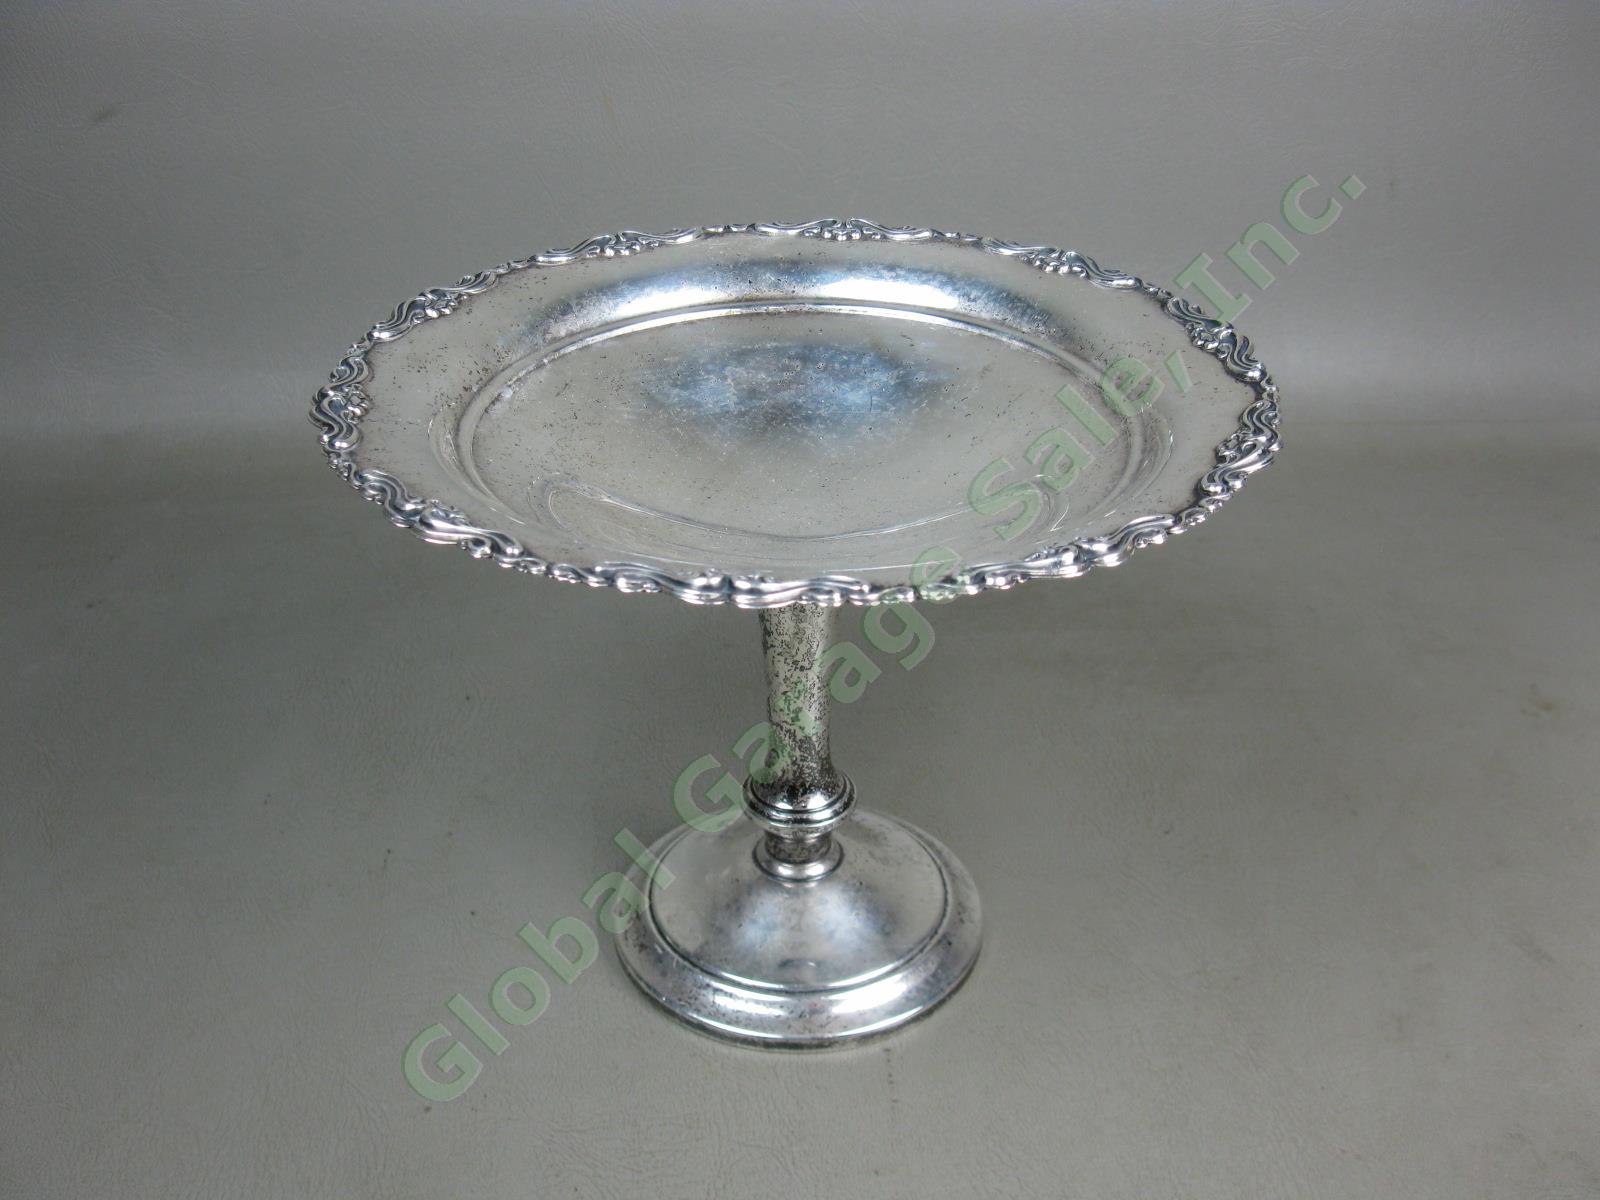 Mueck-Carey Gadroon Sterling Silver Pedestal Bon Candy Compote Dish Tazza 283.5g